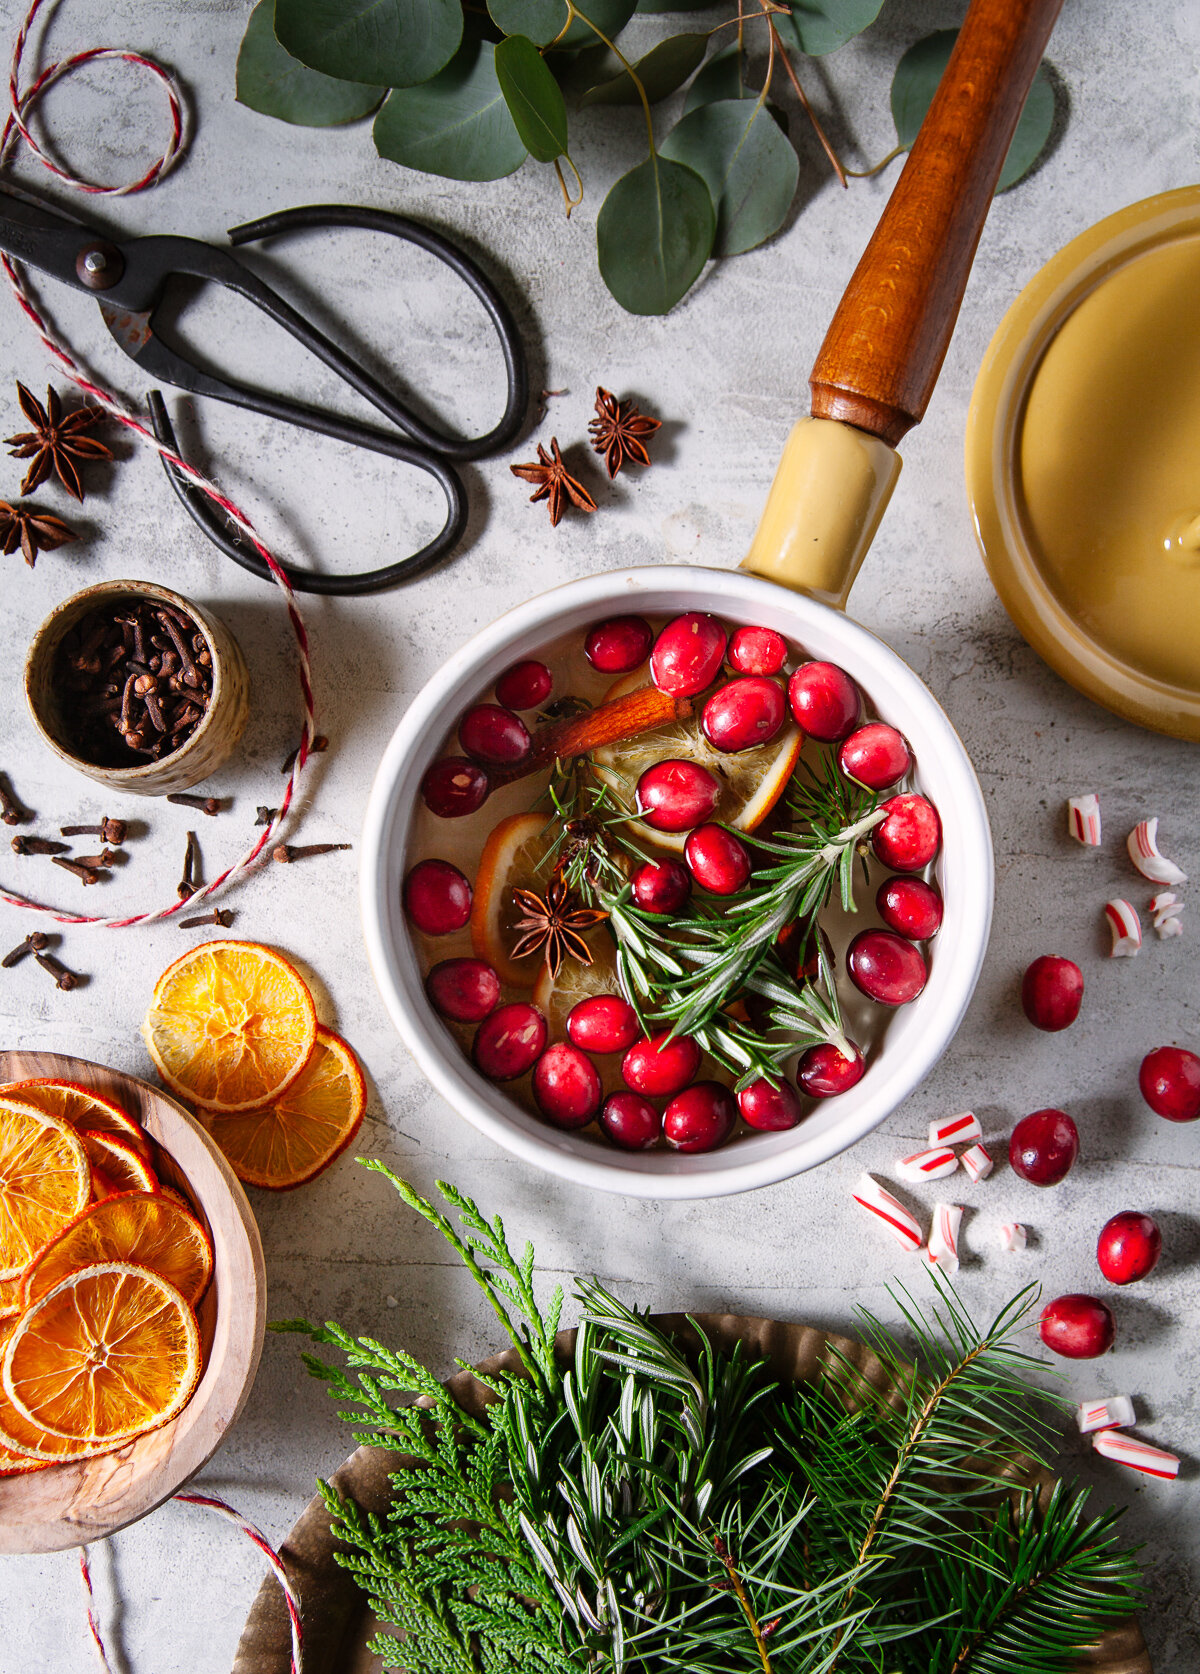 11 Simmer Pot Recipes to Make Your Home Smell Like Fall